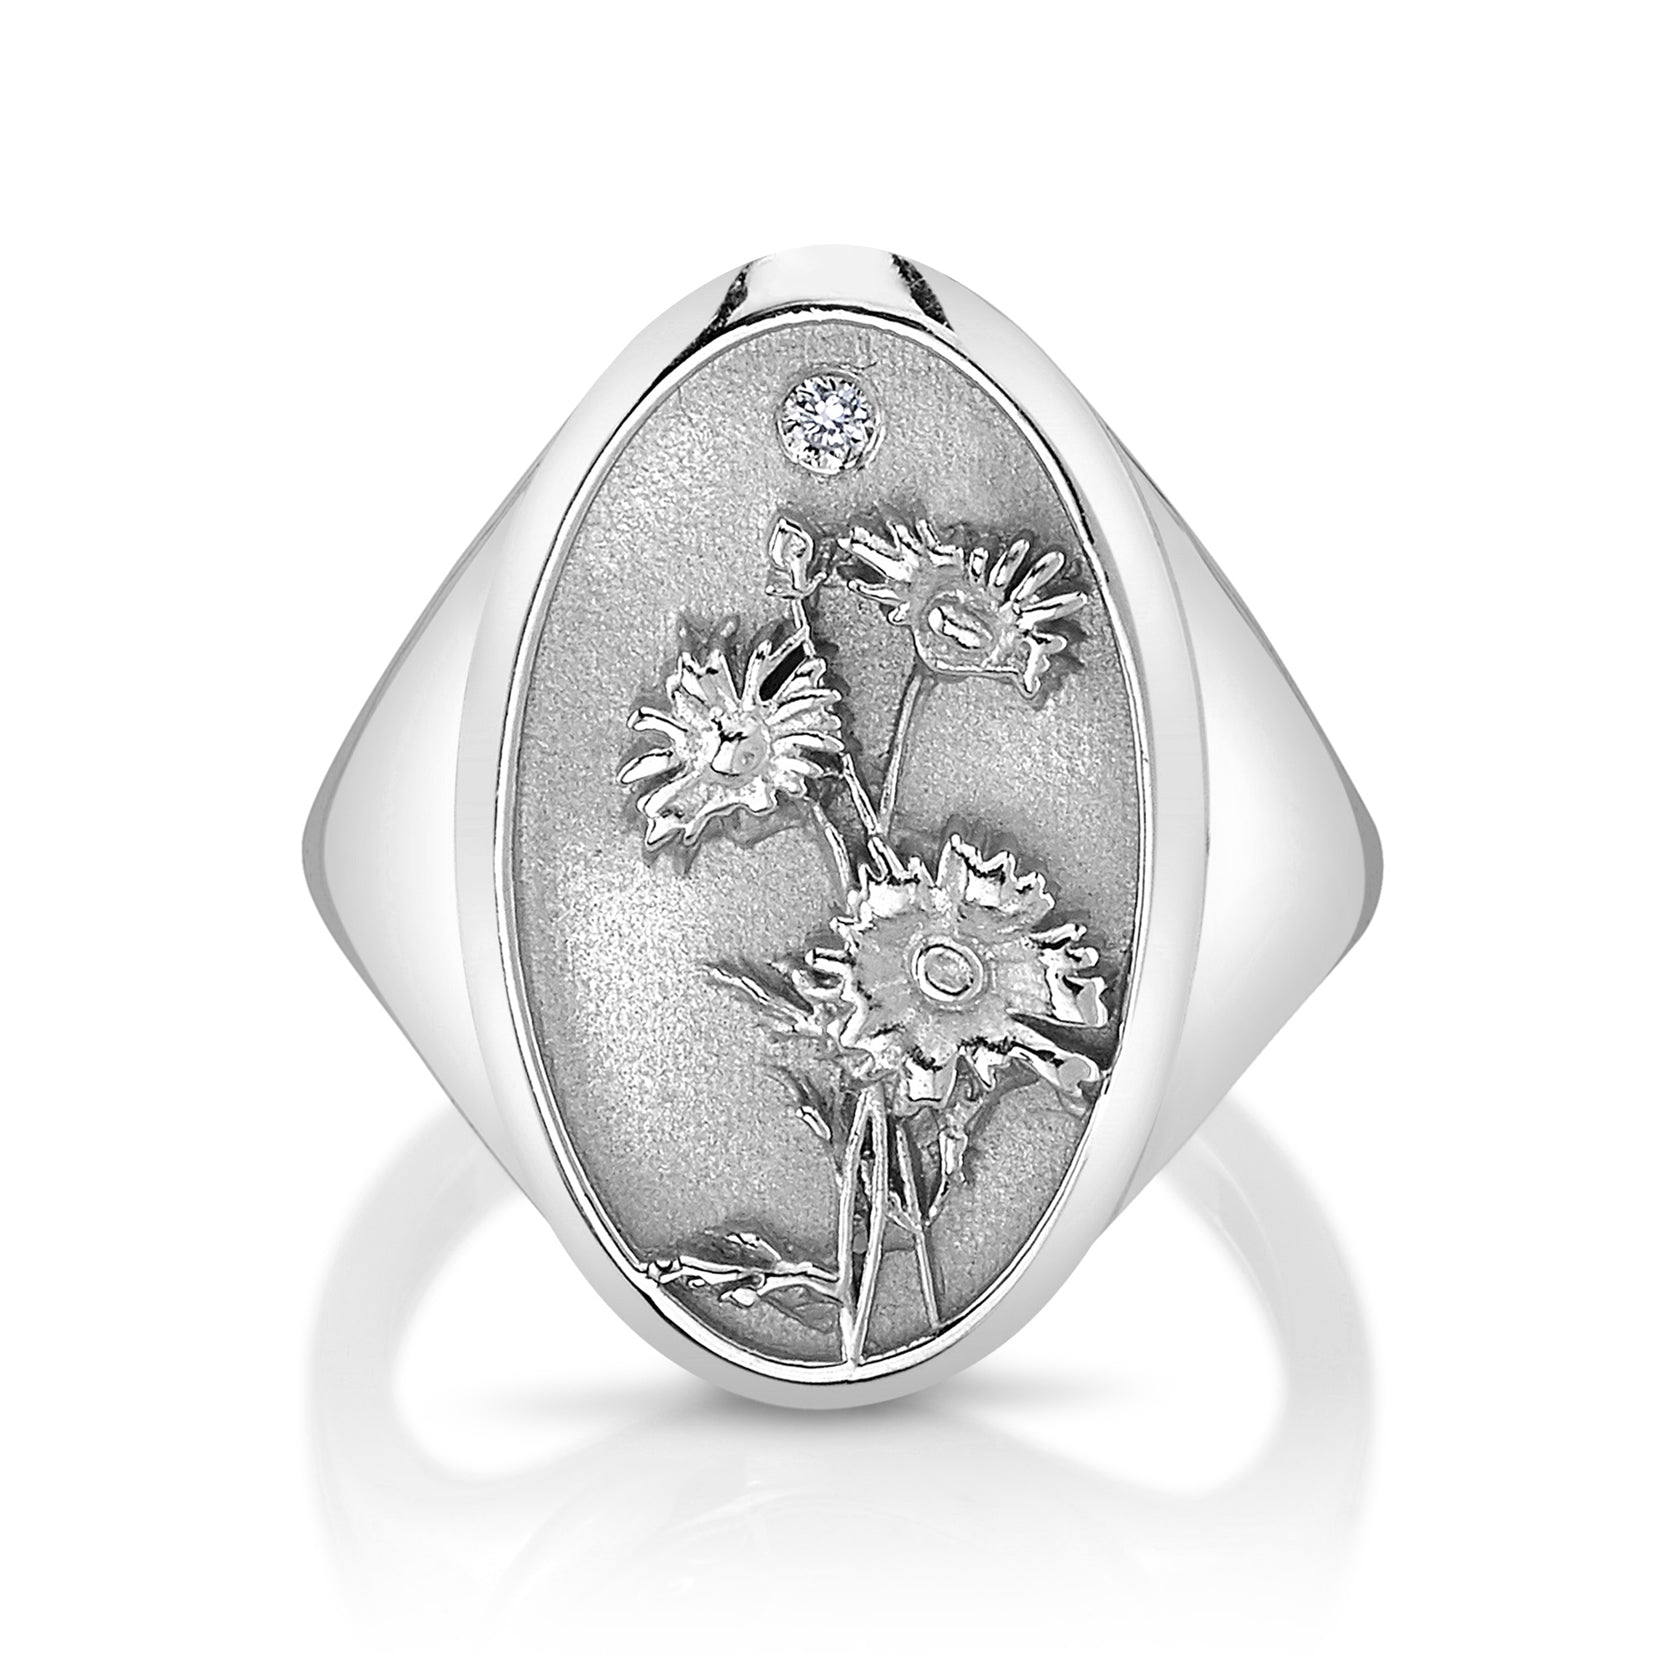 APRIL BIRTH FLOWER SIGNET RING |. STARLING JEWELRY – Starling